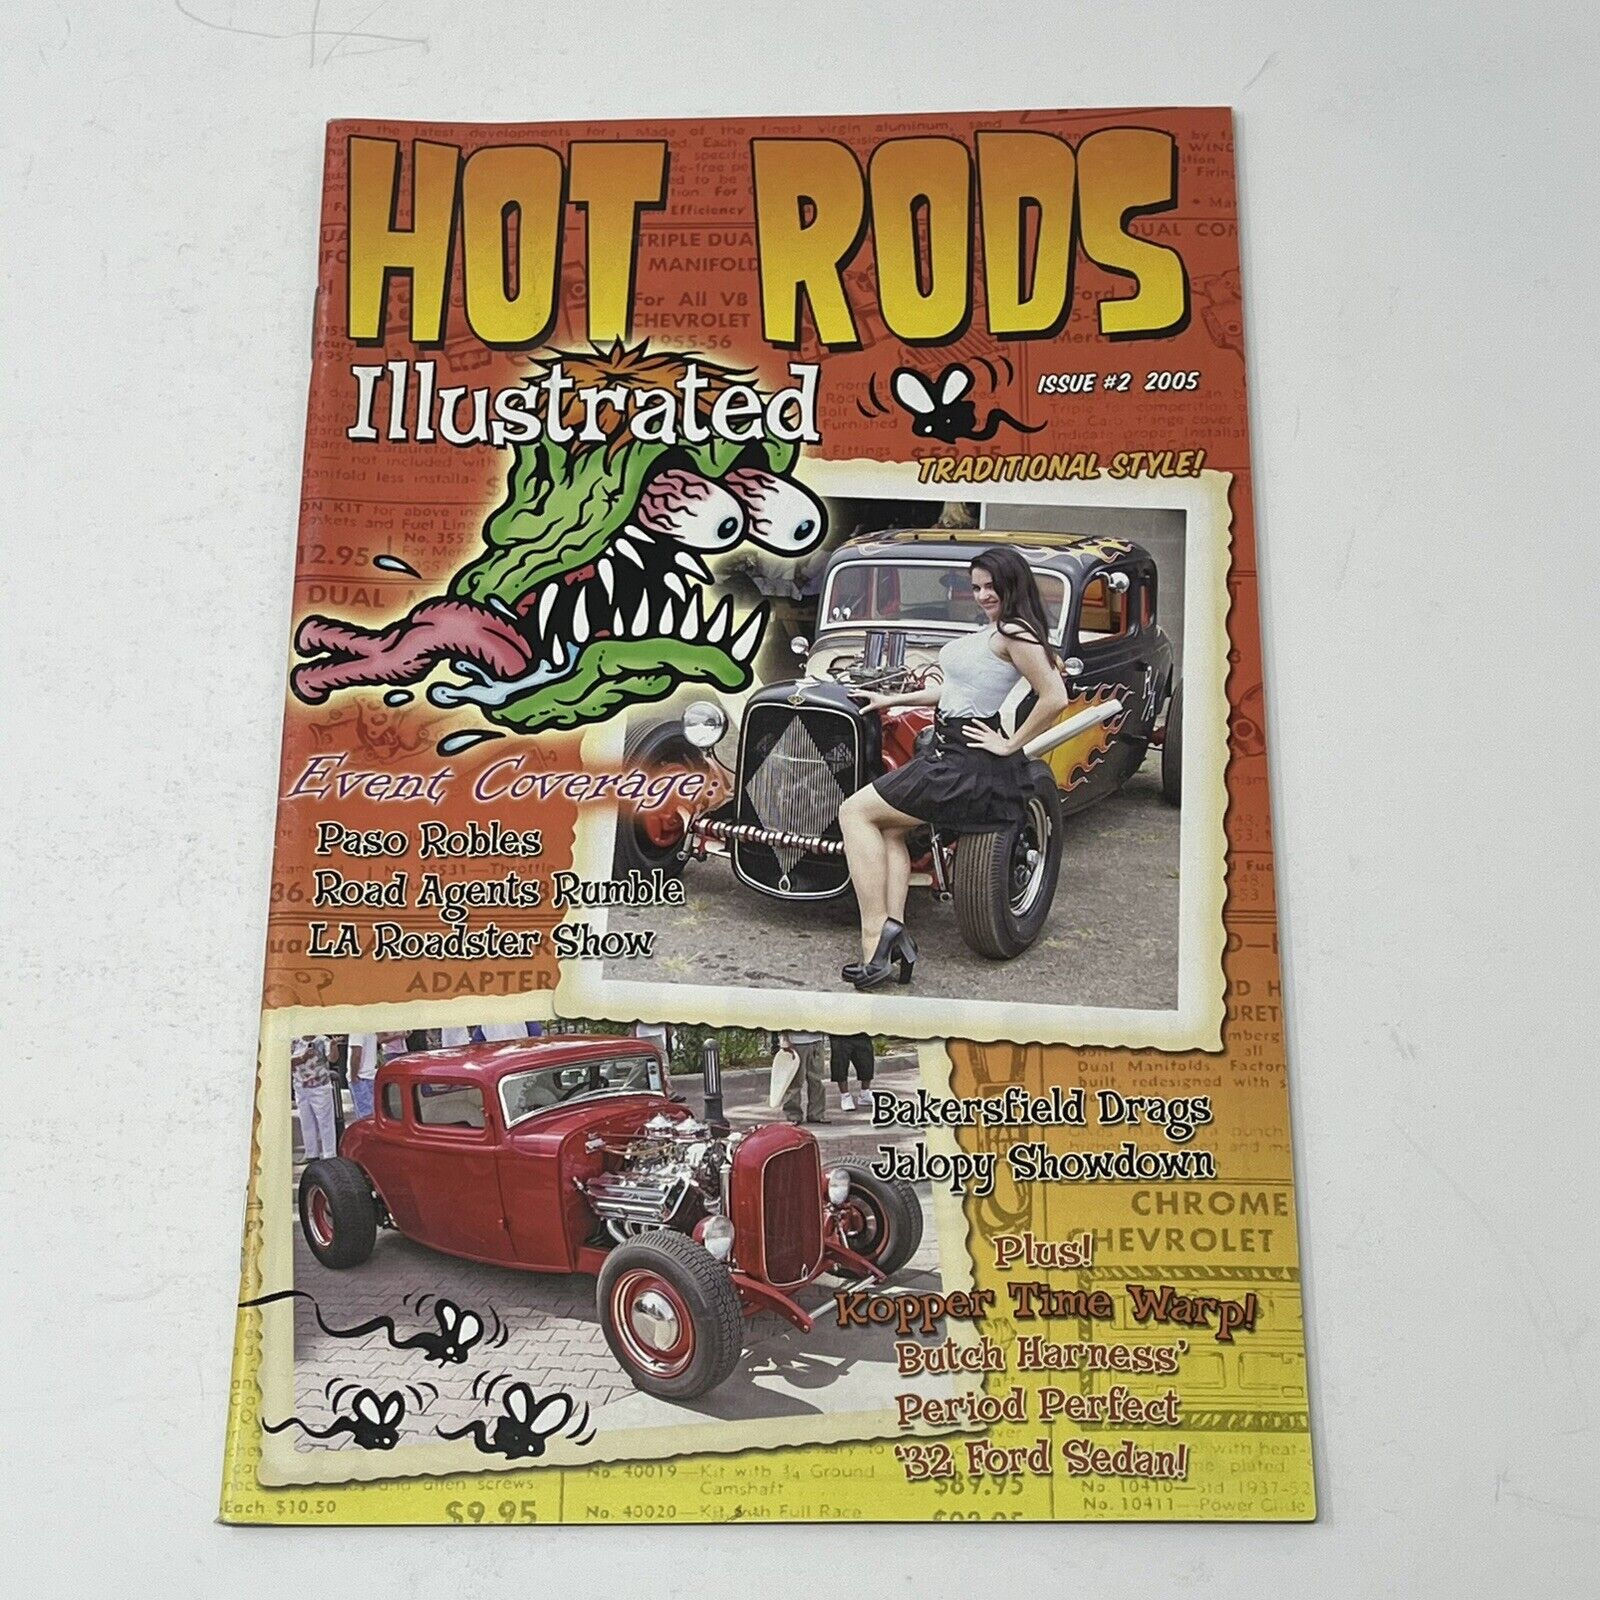 2008 Hot Rods Illustrated Magazine Paso Robles Road Agents Rumble Roadster Show